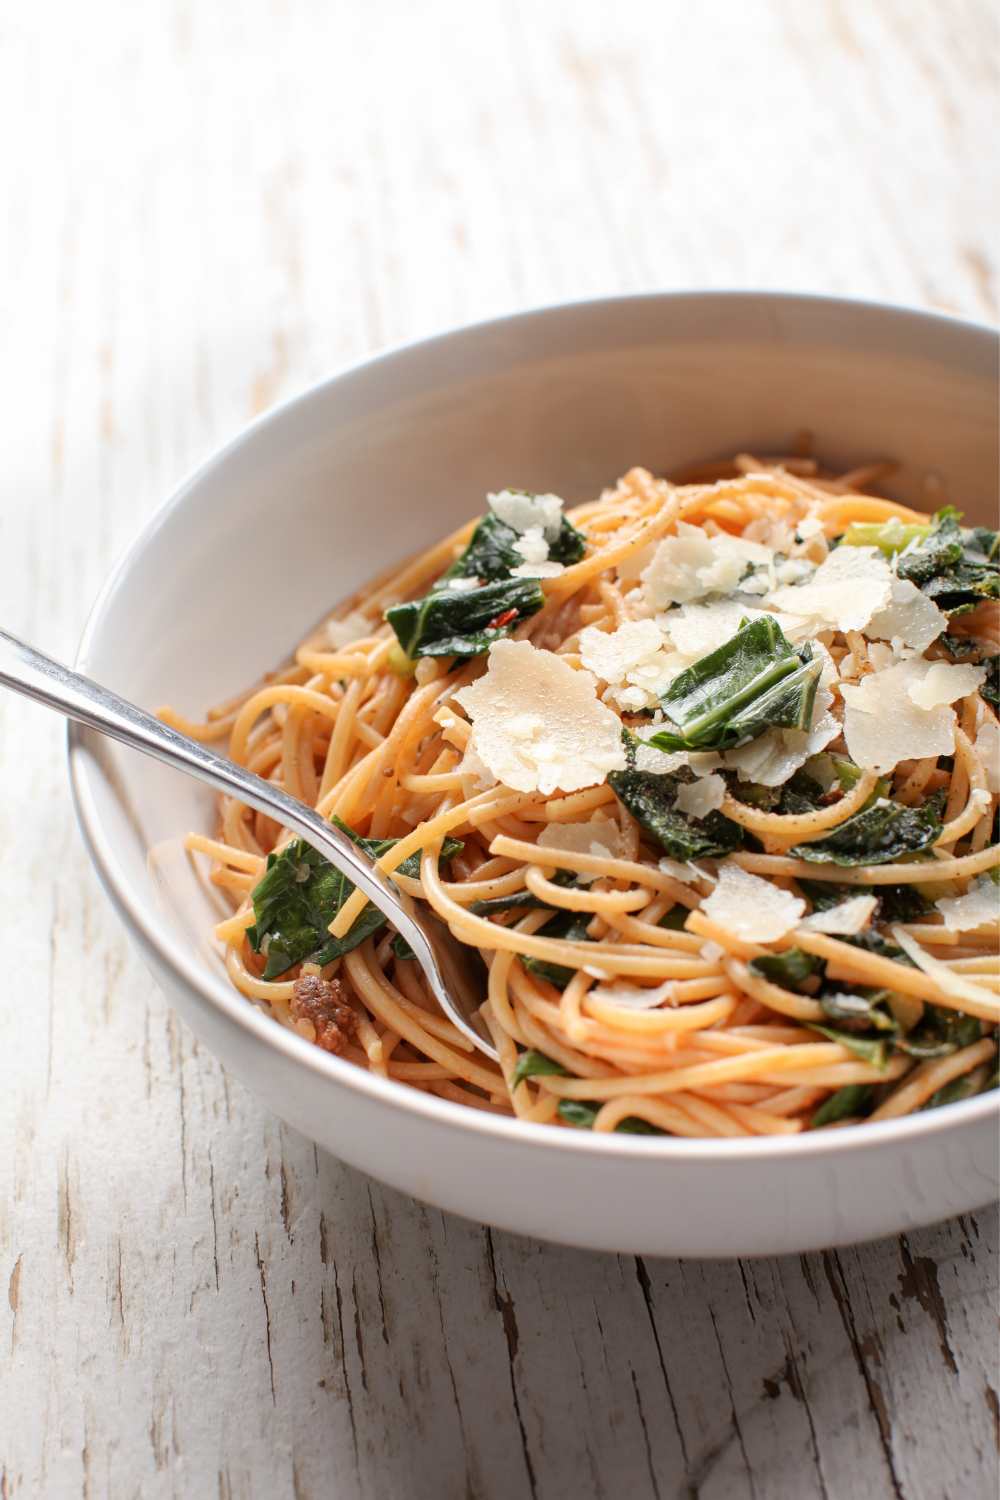 Kale Recipes With Pasta